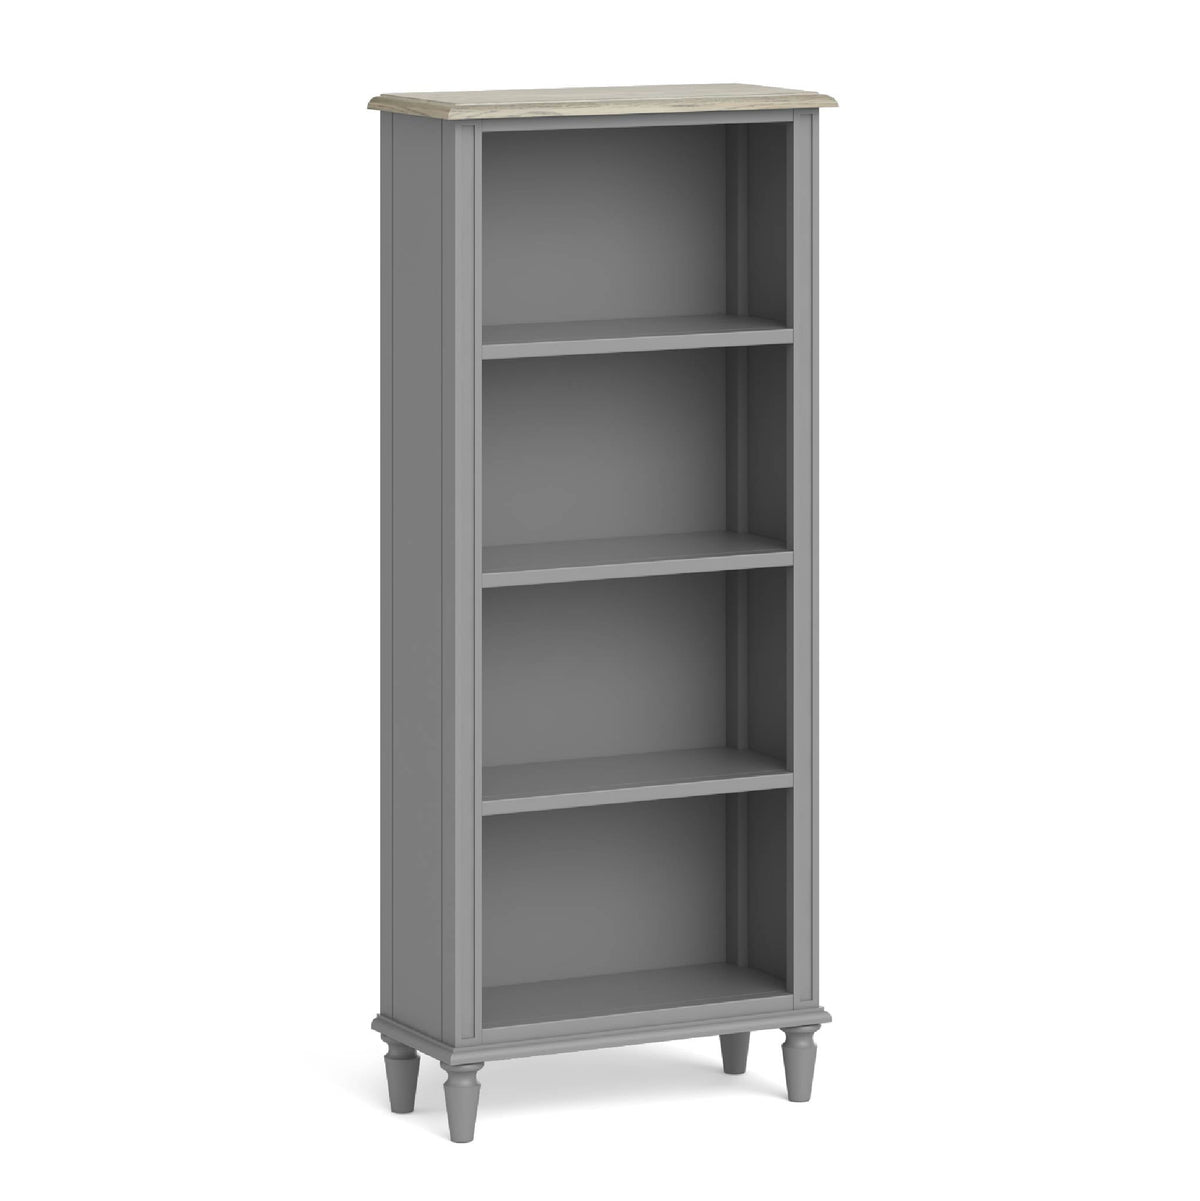 The Mulsanne Grey French Style Slim Bookcase by Roseland Furniture